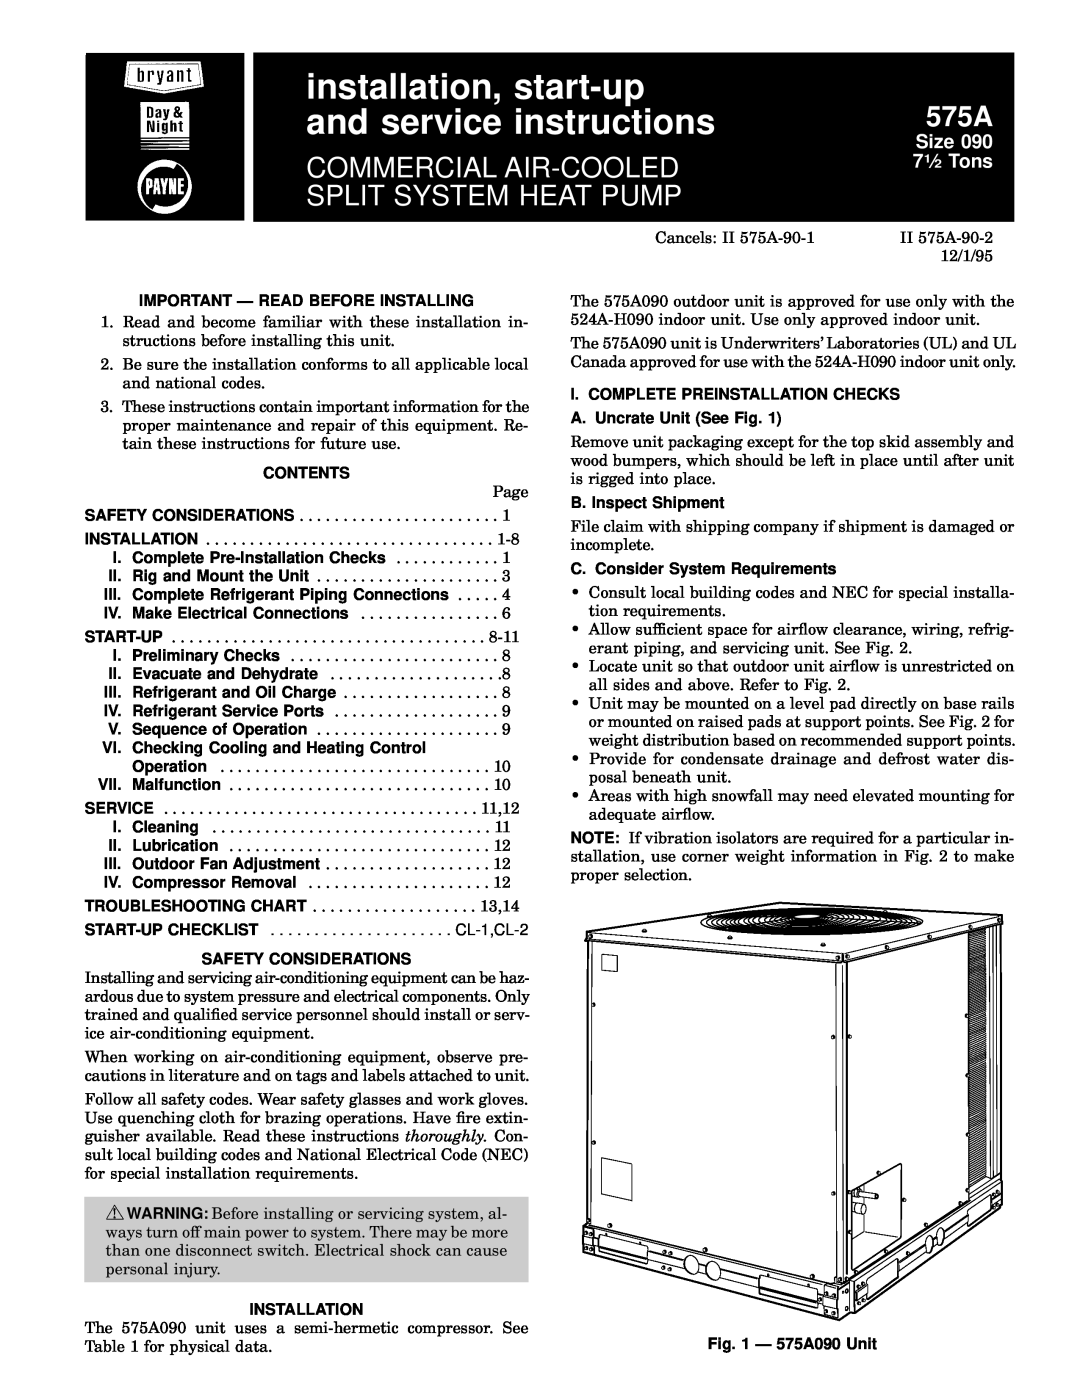 Bryant 575A installation instructions Important Ð Read Before Installing, Contents, Safety Considerations, Installation 